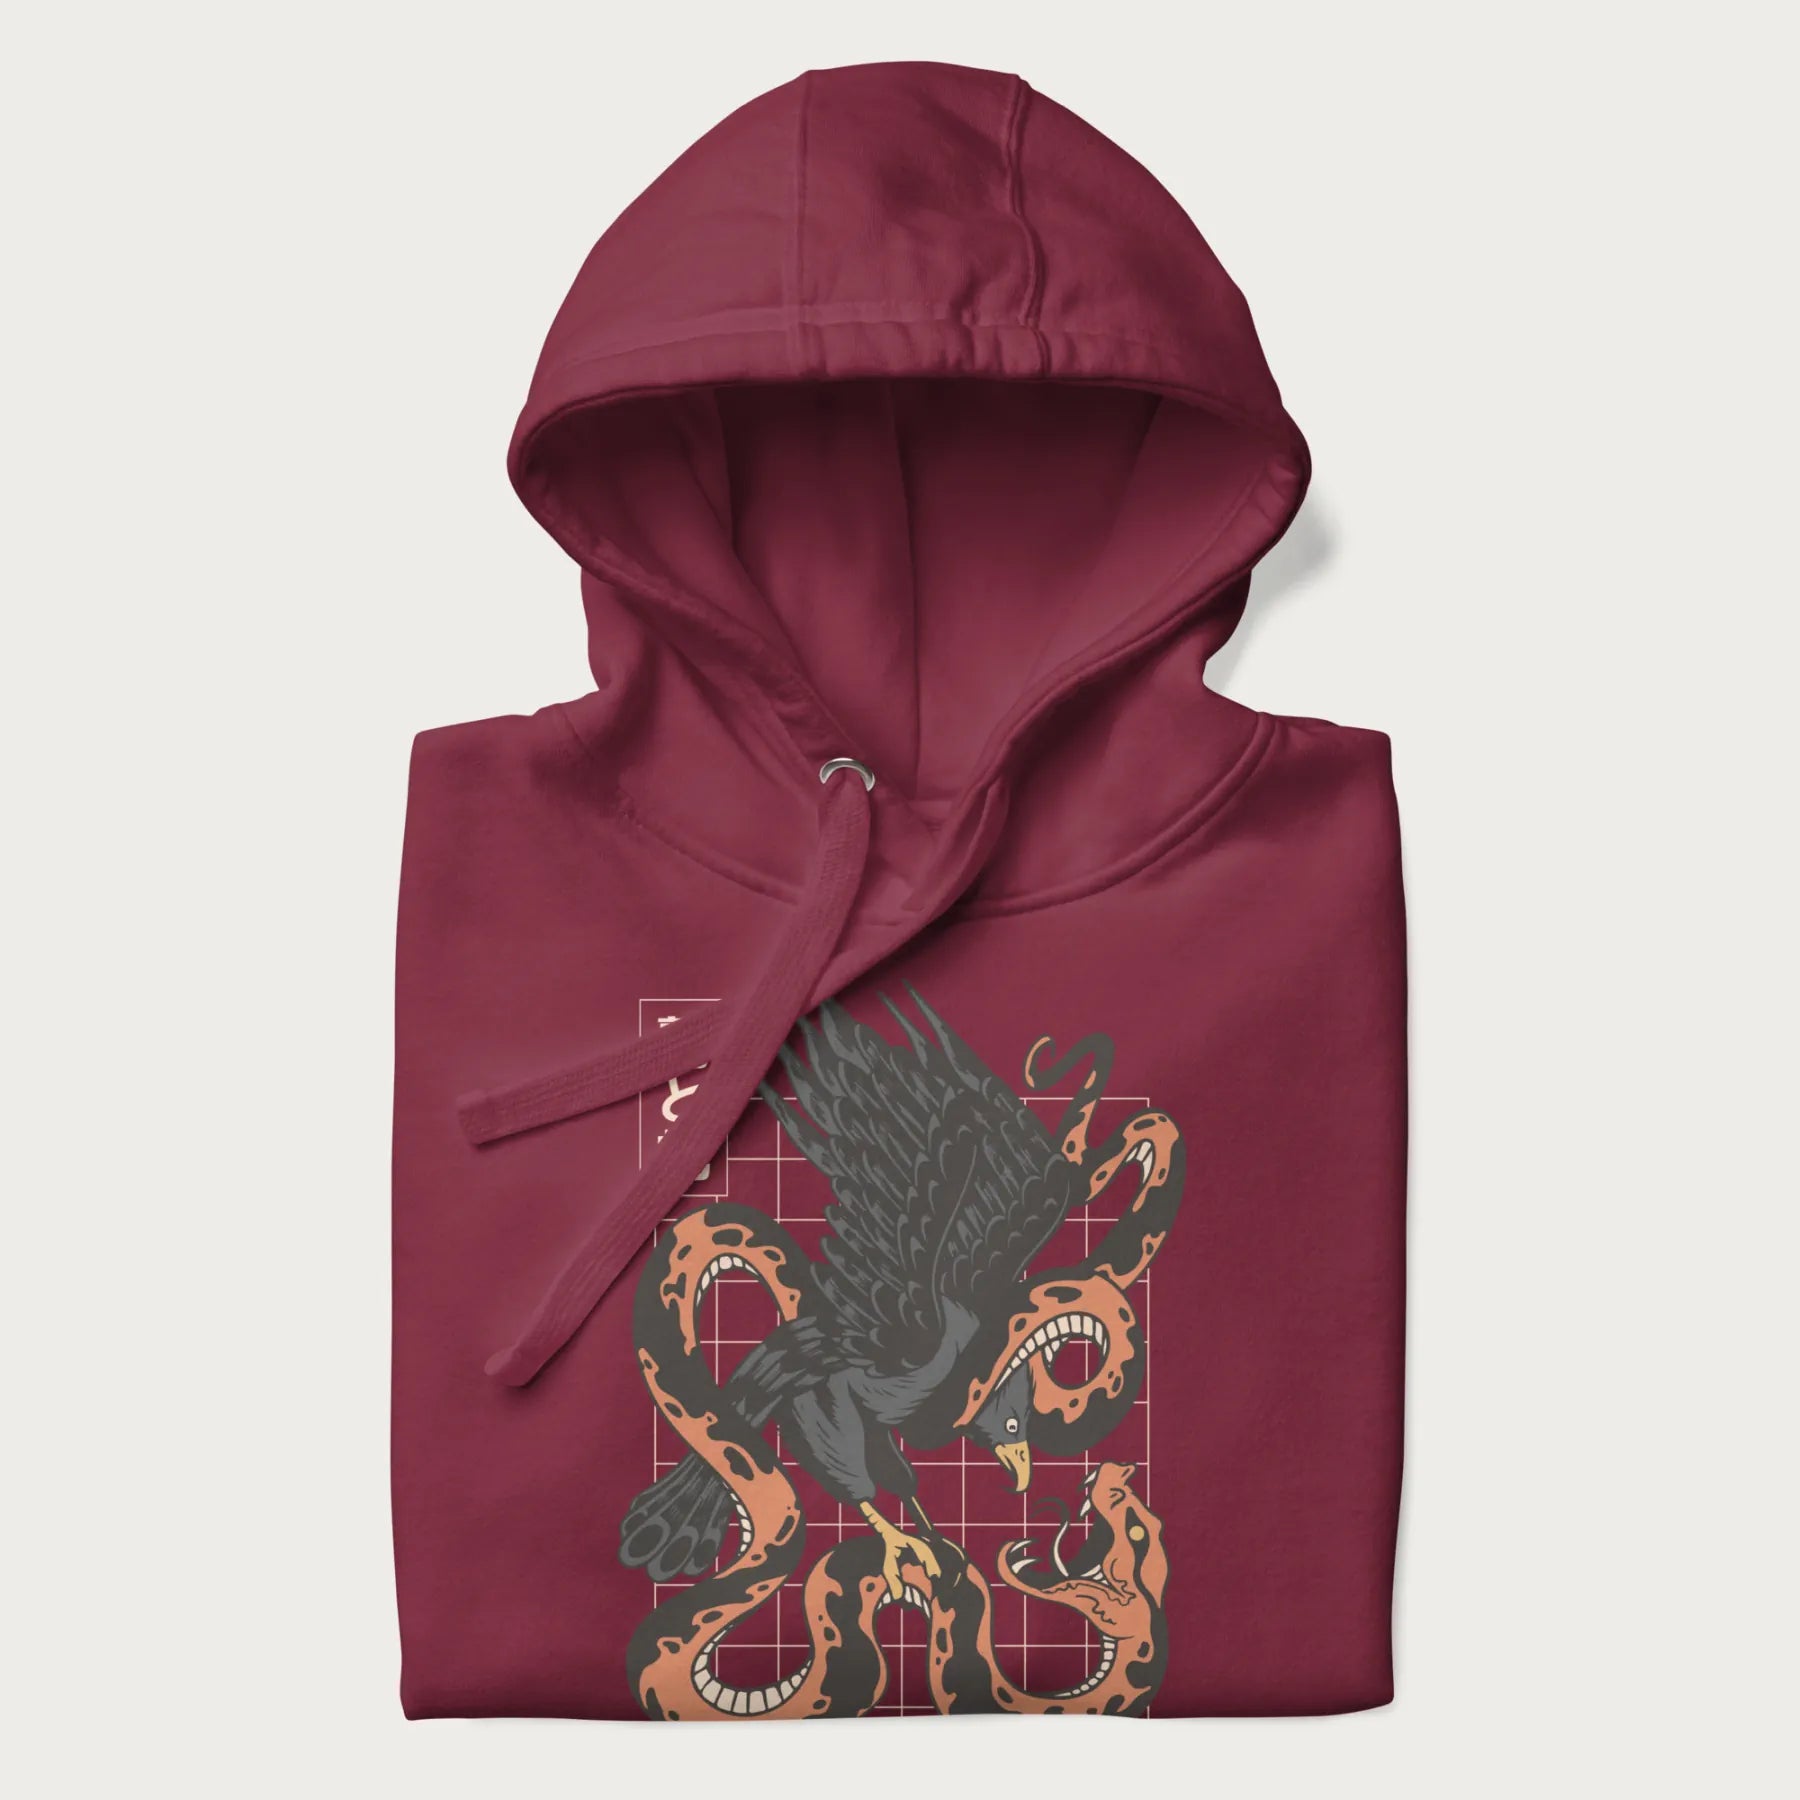 Folded maroon hoodie with Japanese text and a graphic of an eagle battling a snake, with the text 'Tokyo Japan' underneath.